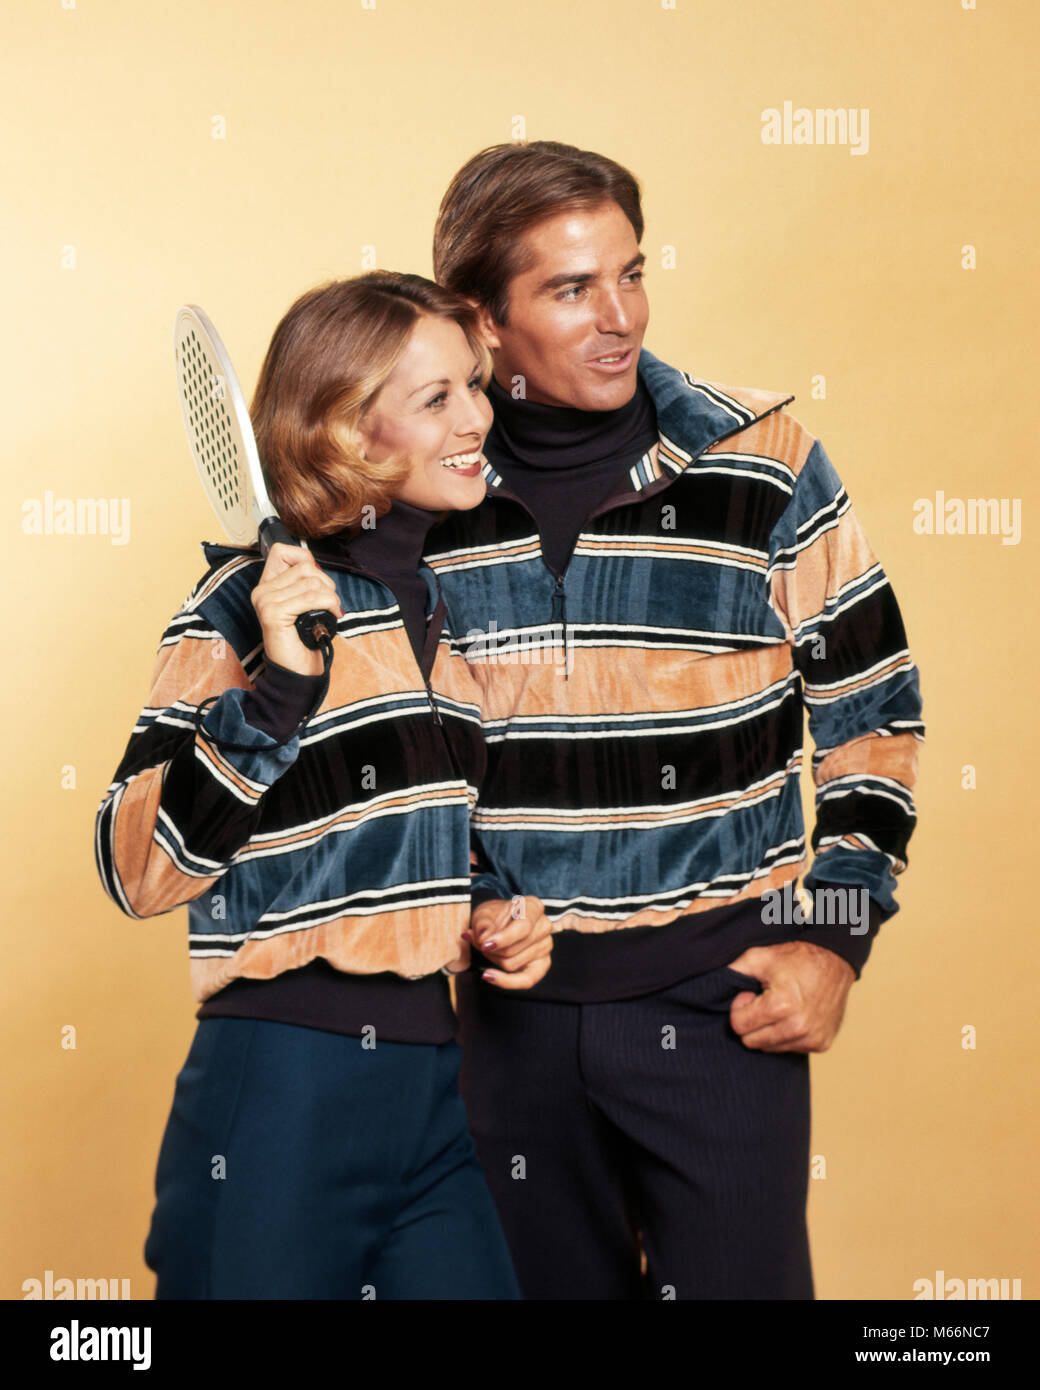 1970s SMILING COUPLE MAN WOMAN HOLDING SQUASH RACKET WEARING MATCHING STRIPED VELOUR PULLOVER SWEATERS FASHION SPORTSWEAR - ks14987 BAN001 HARS PLEASED JOY LIFESTYLE SATISFACTION STRIPED MARRIED SPOUSE HUSBANDS GROWNUP LUXURY SQUASH FRIENDSHIP HALF-LENGTH GROWN-UP CARING ATHLETIC COUPLES INDOORS CONFIDENCE NOSTALGIA TOGETHERNESS 20-25 YEARS 25-30 YEARS MATCHING SUCCESS WIVES HAPPINESS NOURISH CHEERFUL LEISURE STYLES RELAXATION CHOICE RECREATION PRIDE SMILES SWEATERS CONNECTION JOYFUL FASHIONS NOURISHMENT VELOUR YOUNG ADULT MAN YOUNG ADULT WOMAN CAUCASIAN ETHNICITY OLD FASHIONED PERSONS Stock Photo